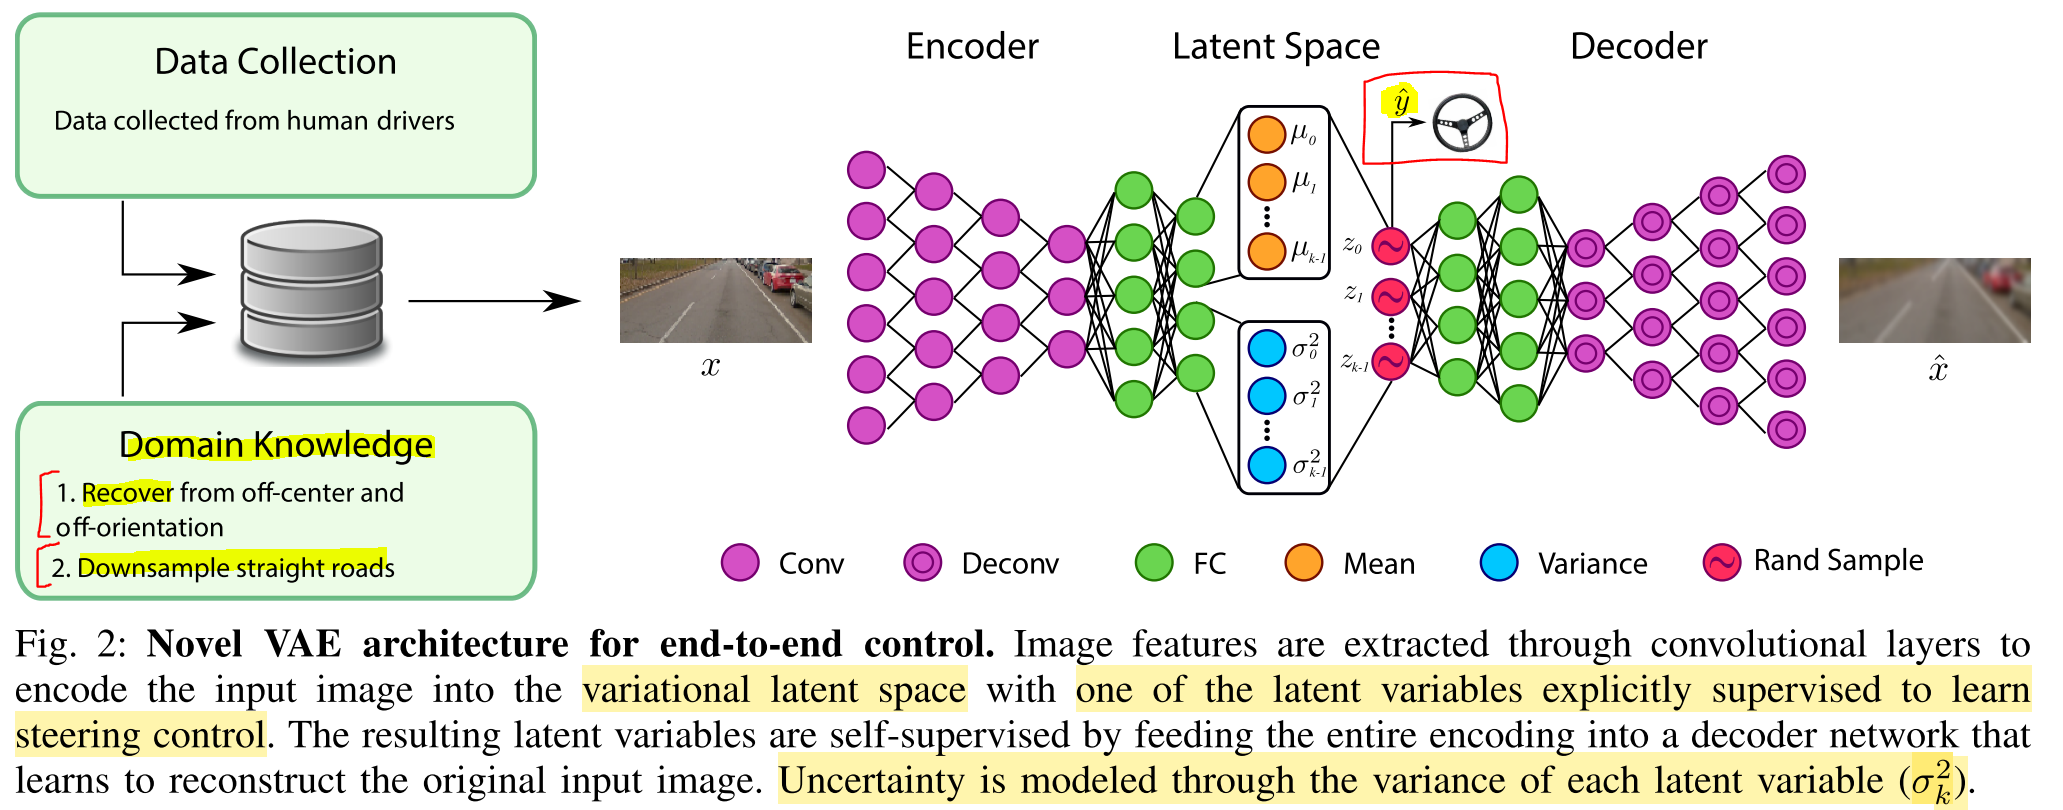 One particular latent variable ^y is explicitly supervised to predict steering control. Anther interesting idea: augmentation is based on domain knowledge - if a method used to the middle-view is given some left-view image, it should predict some correction to the right. Source.